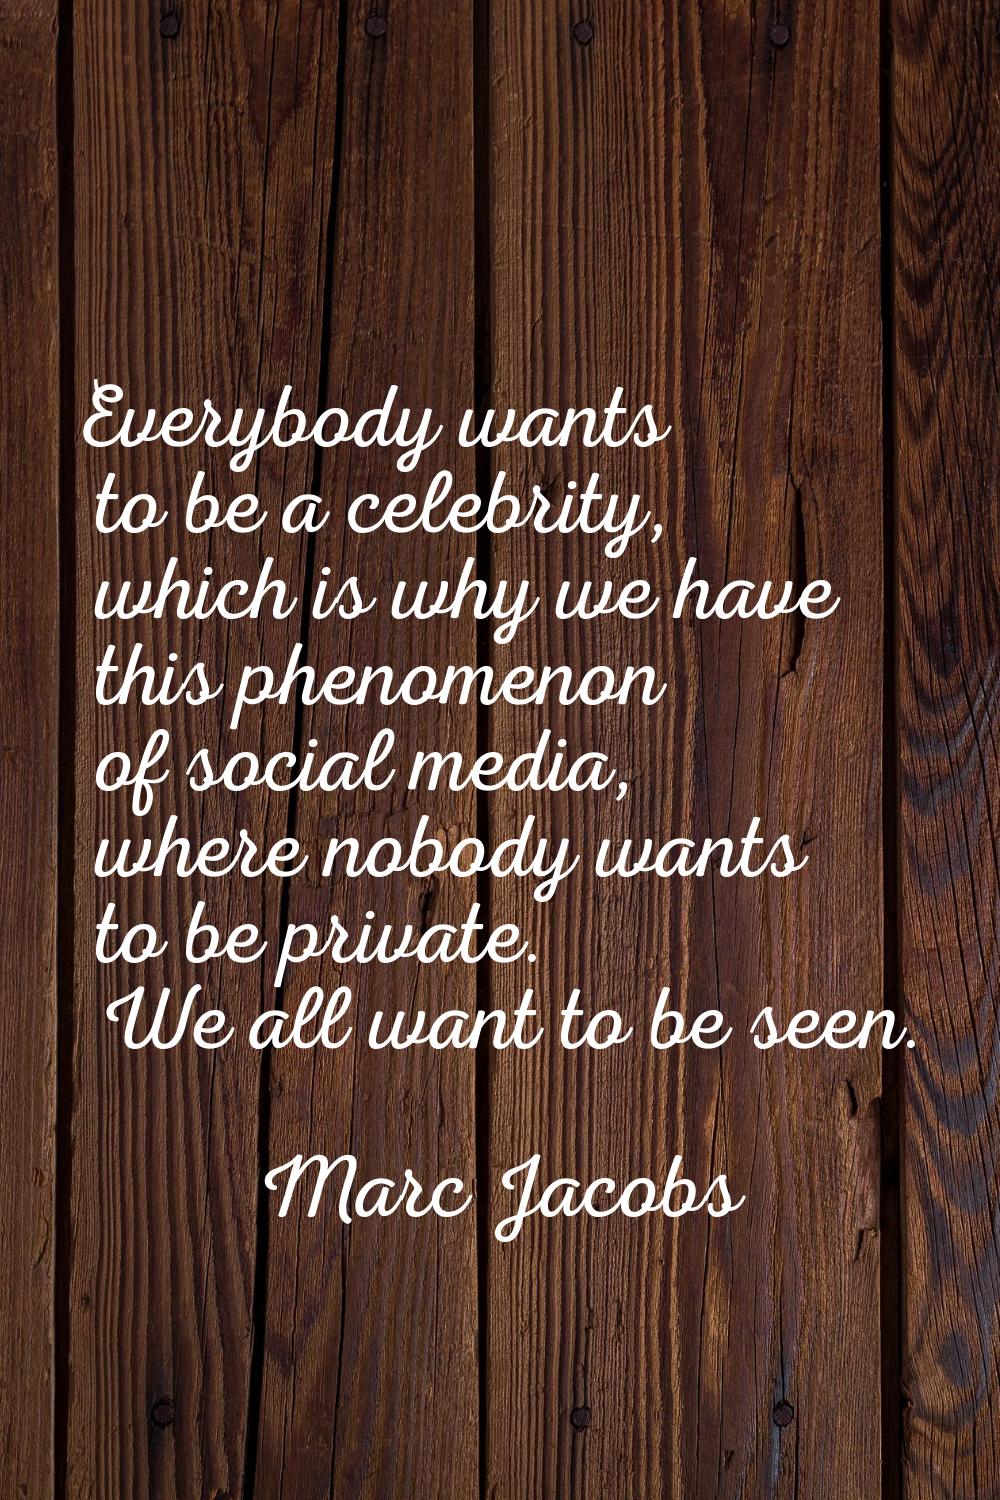 Everybody wants to be a celebrity, which is why we have this phenomenon of social media, where nobo